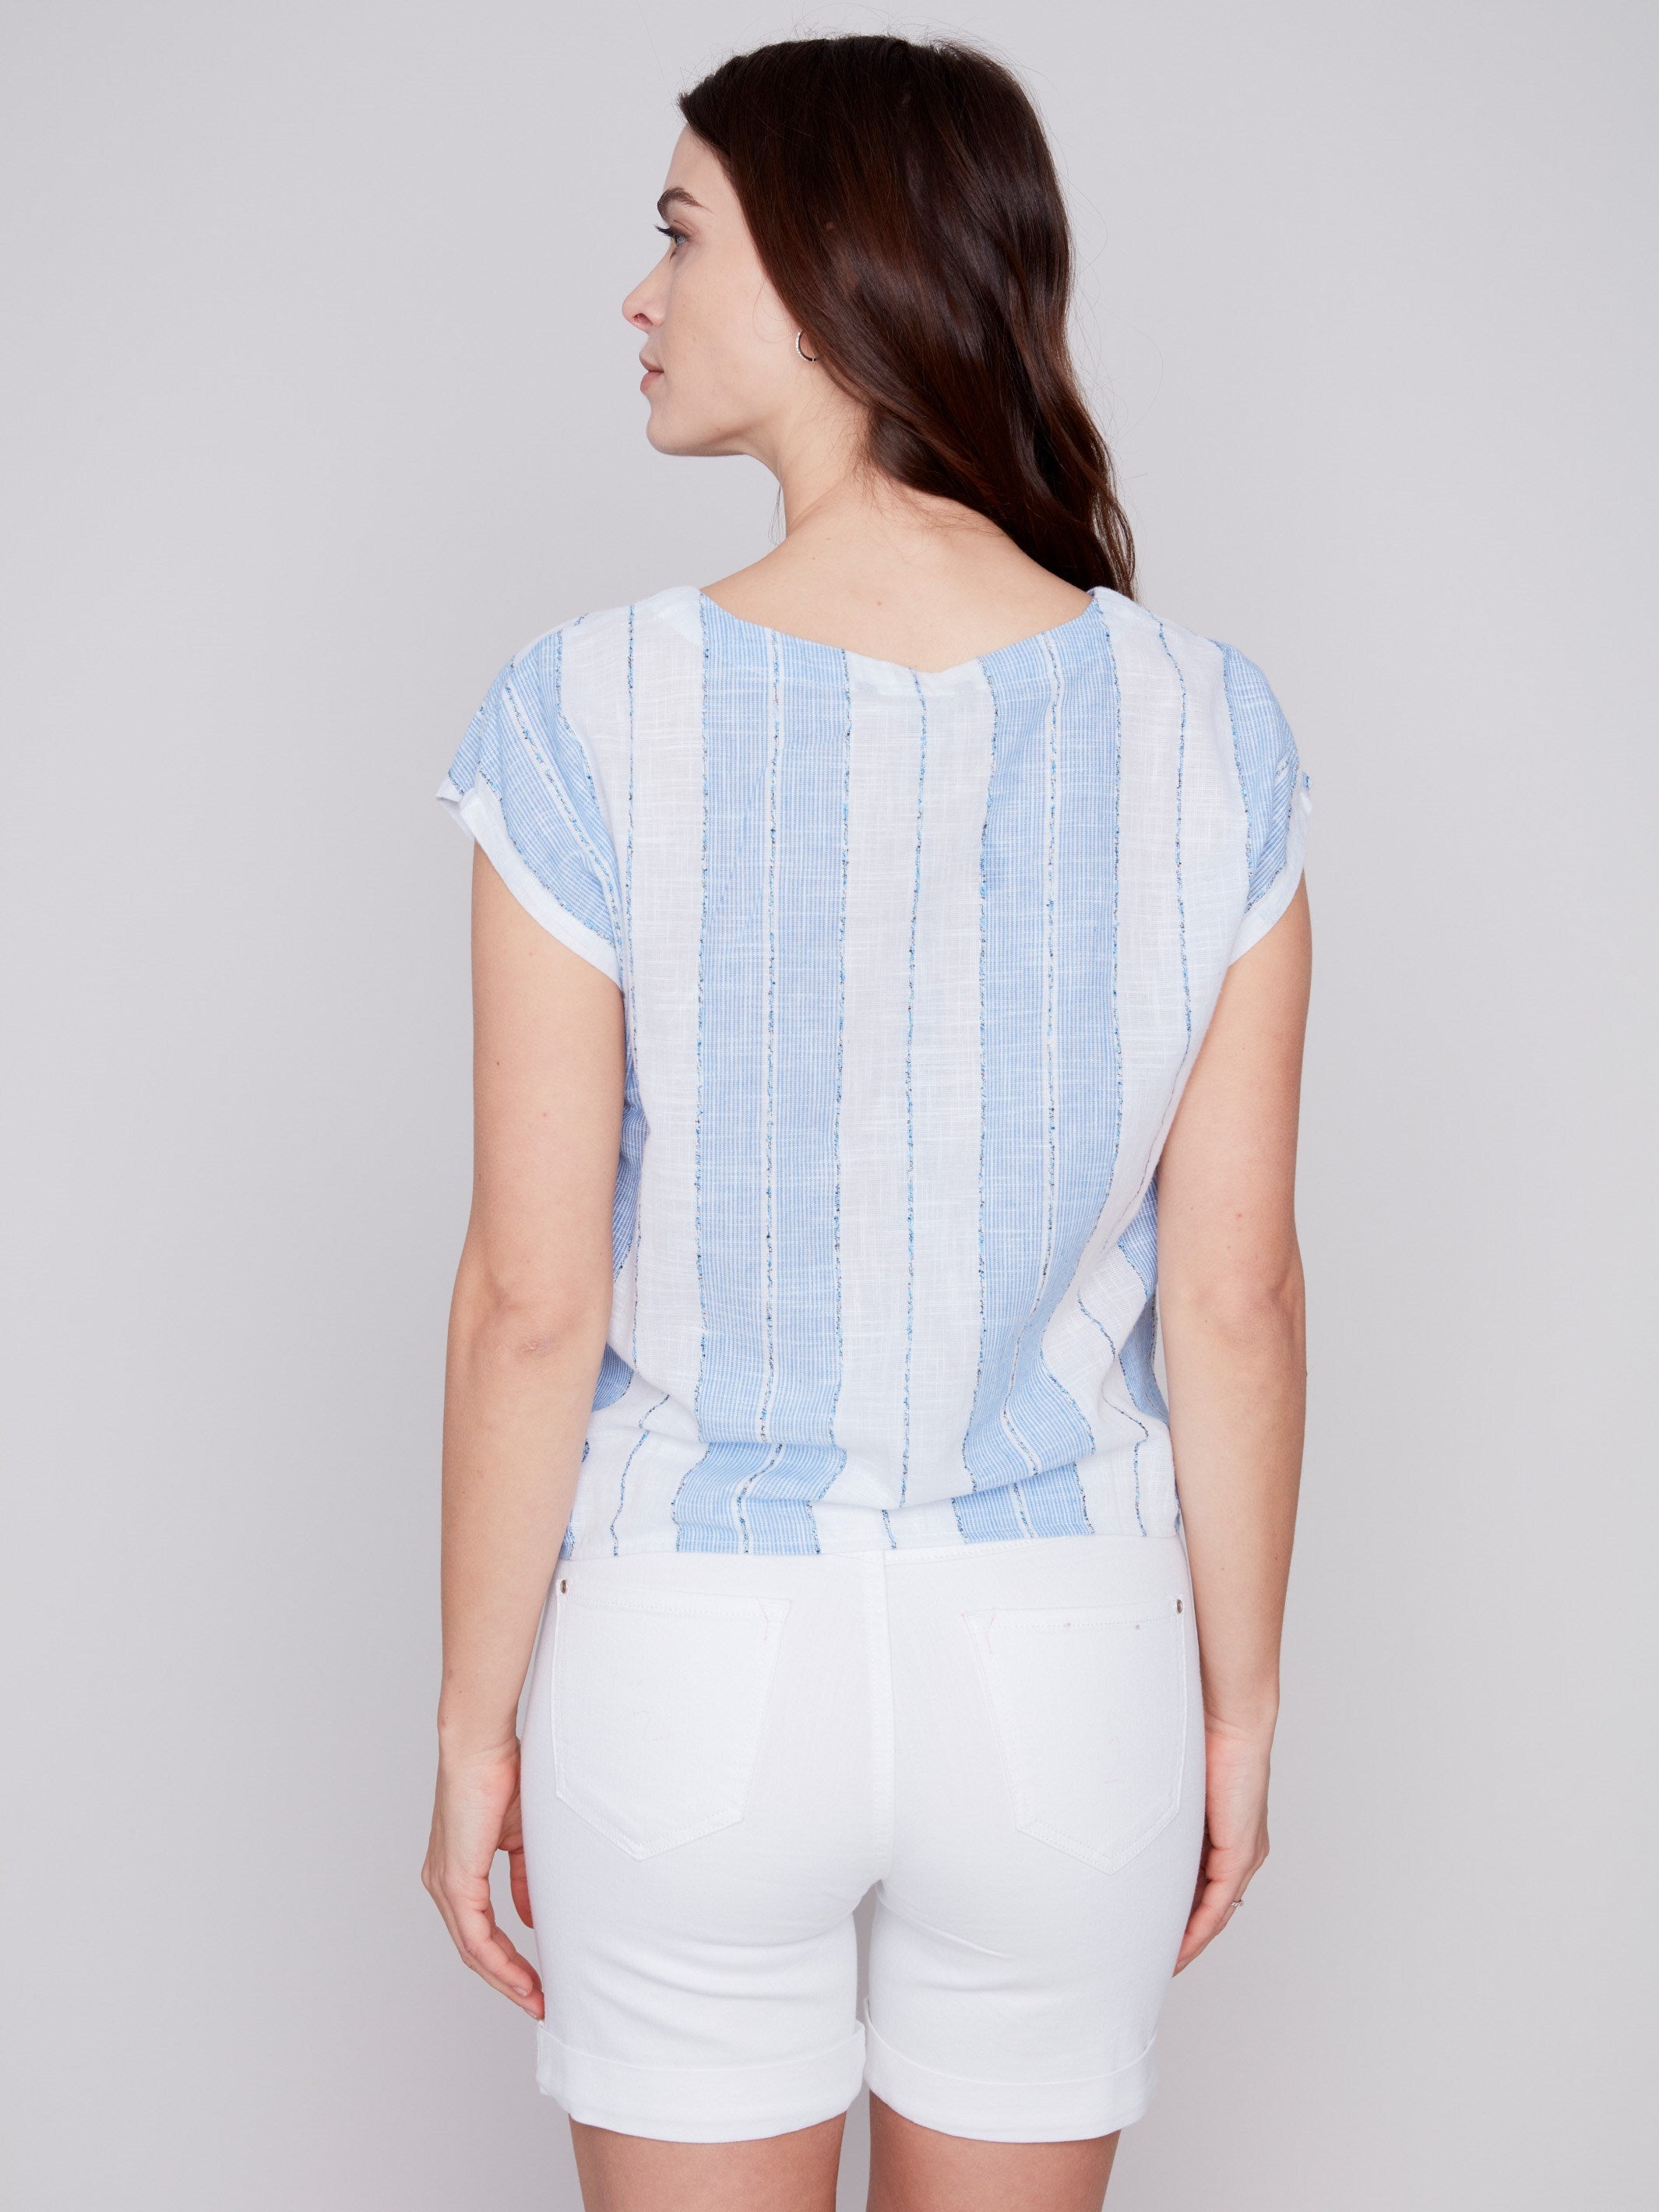 Printed Front Tie Top - Blue - Charlie B Collection Canada - Image 4